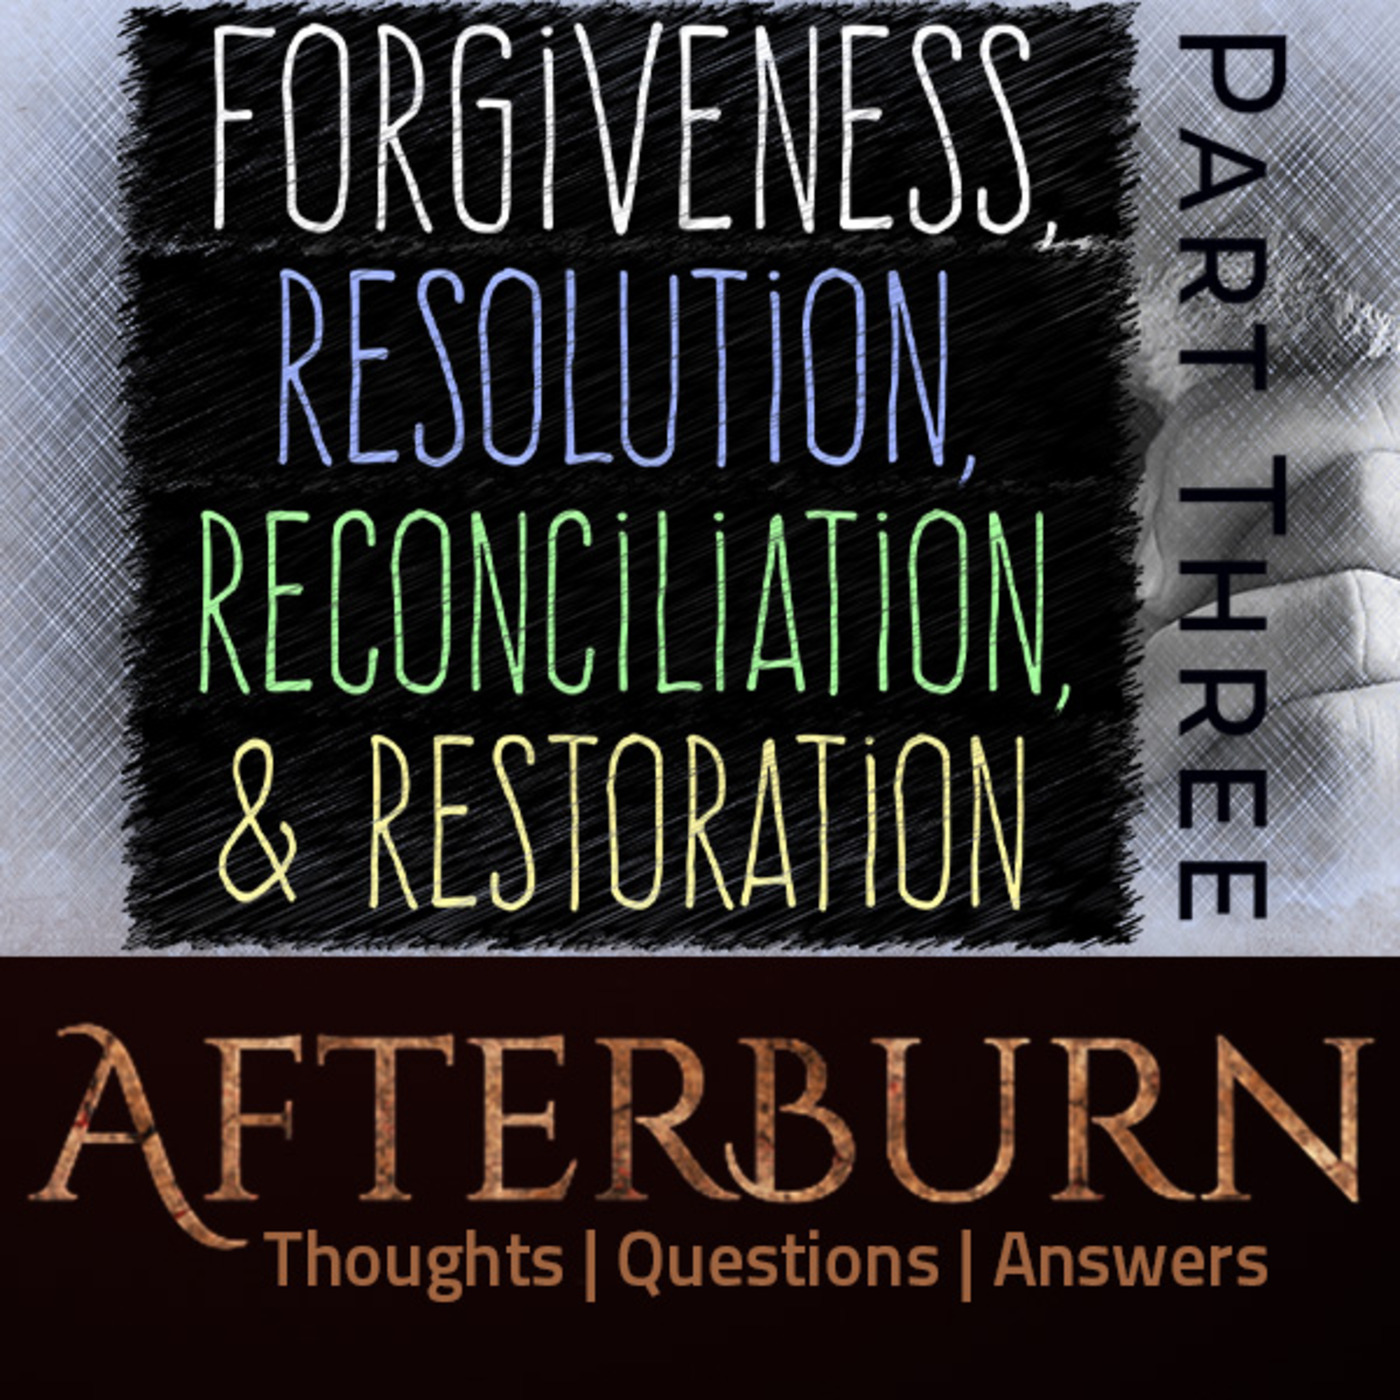 Afterburn: Thoughts, Q&A on Forgiveness, Resolution, Reconciliation & Restoration - Part Three